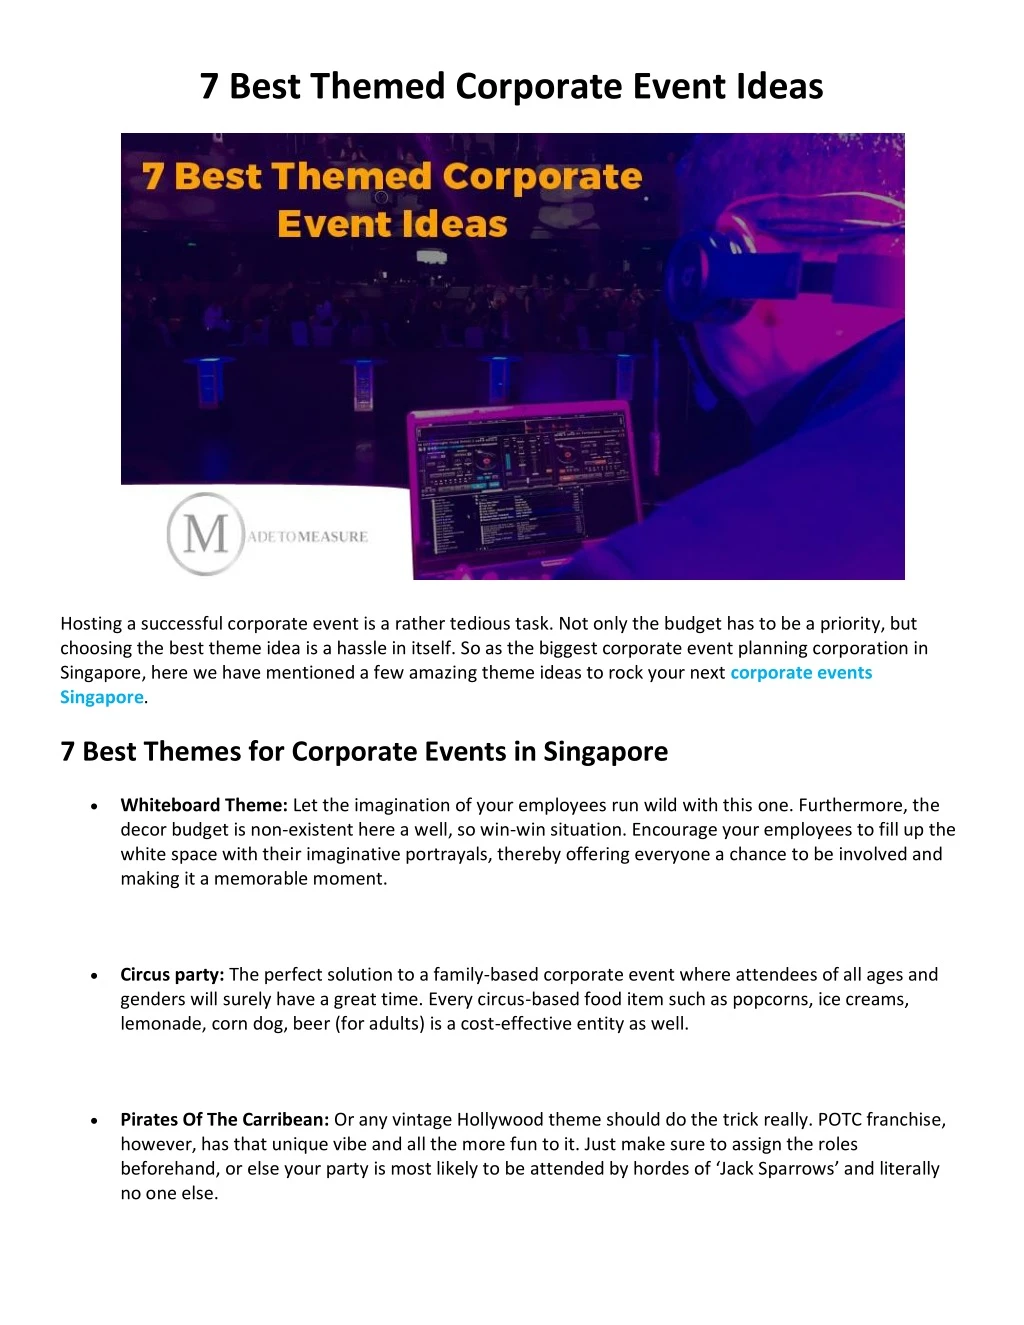 7 best themed corporate event ideas